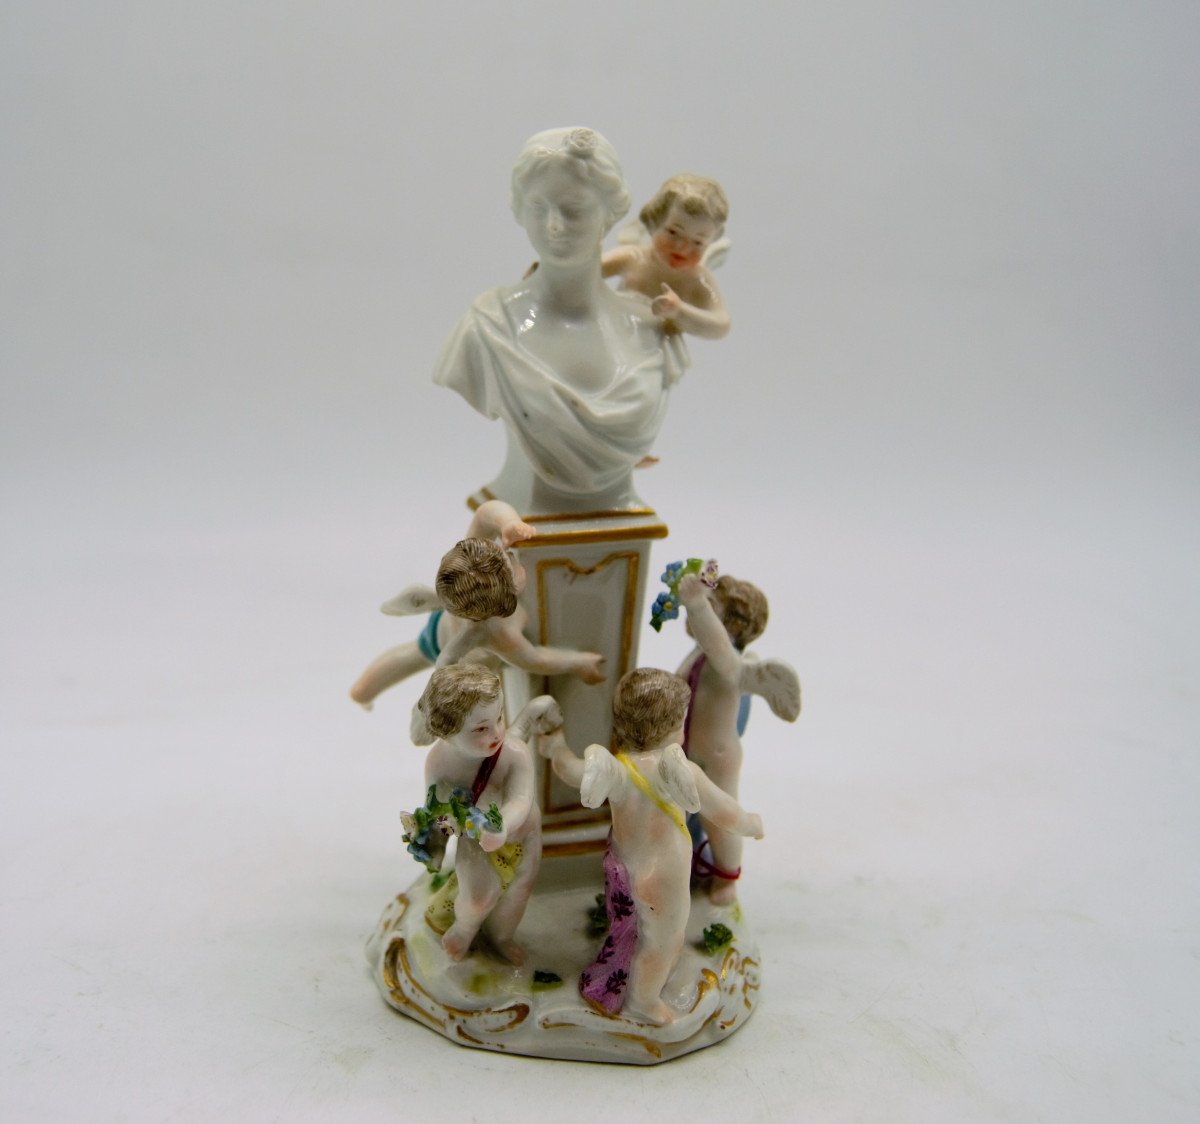 Meissen Porcelain Subject - Putti And Female Bust - XVIIIth